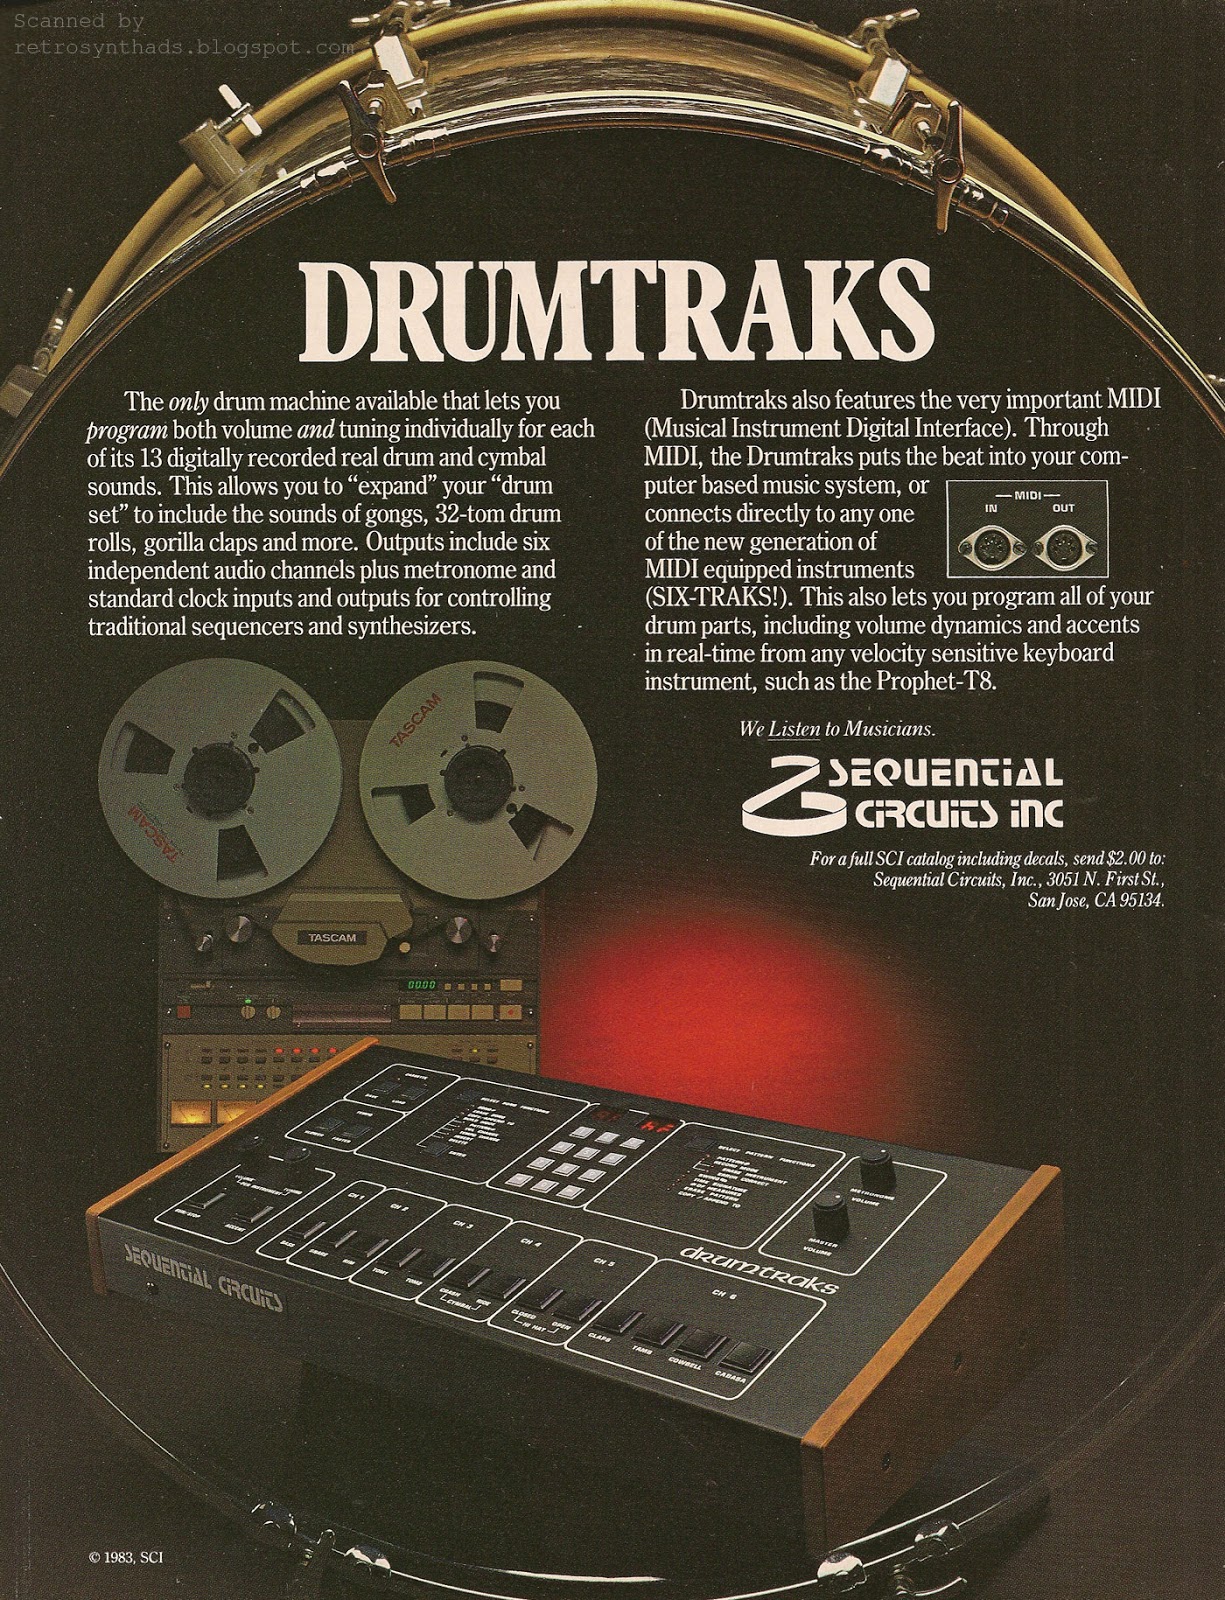 halvkugle Barbermaskine Rekvisitter Retro Synth Ads: Sequential Circuits Inc. Drumtraks self-titled ad,  Keyboard 1984